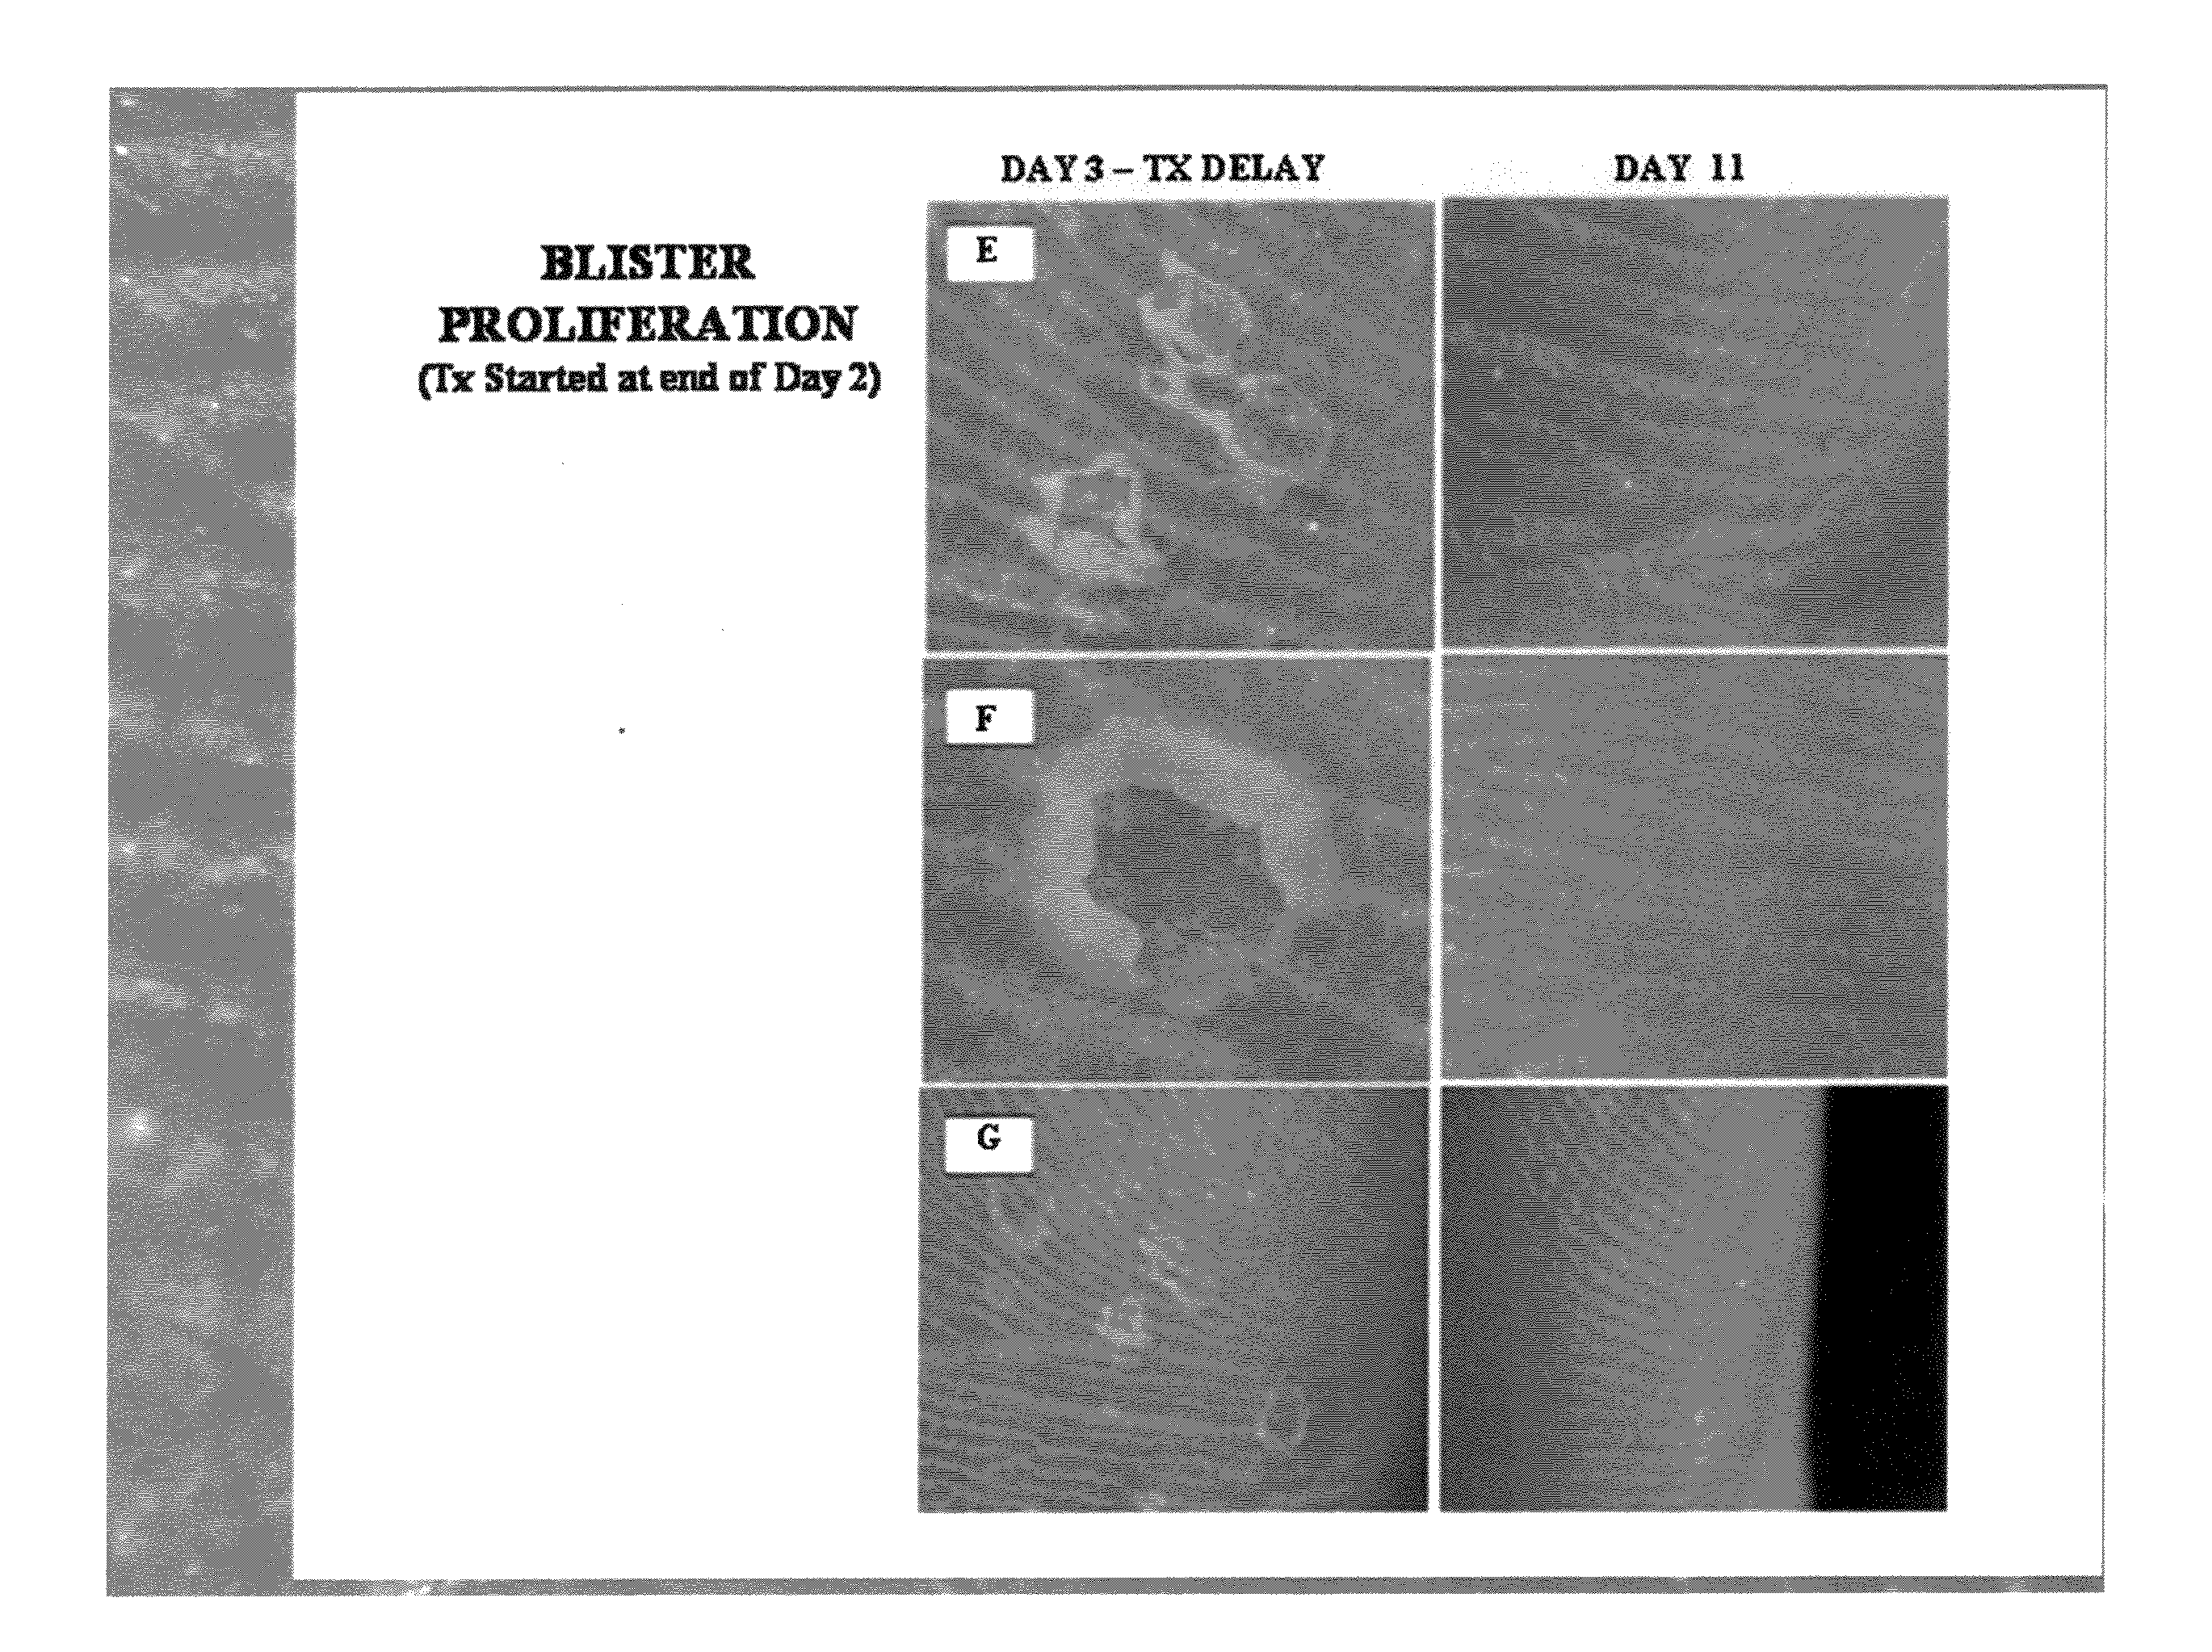 Method of treating dyshidrosis(pompholyx) and related dry skin disorders